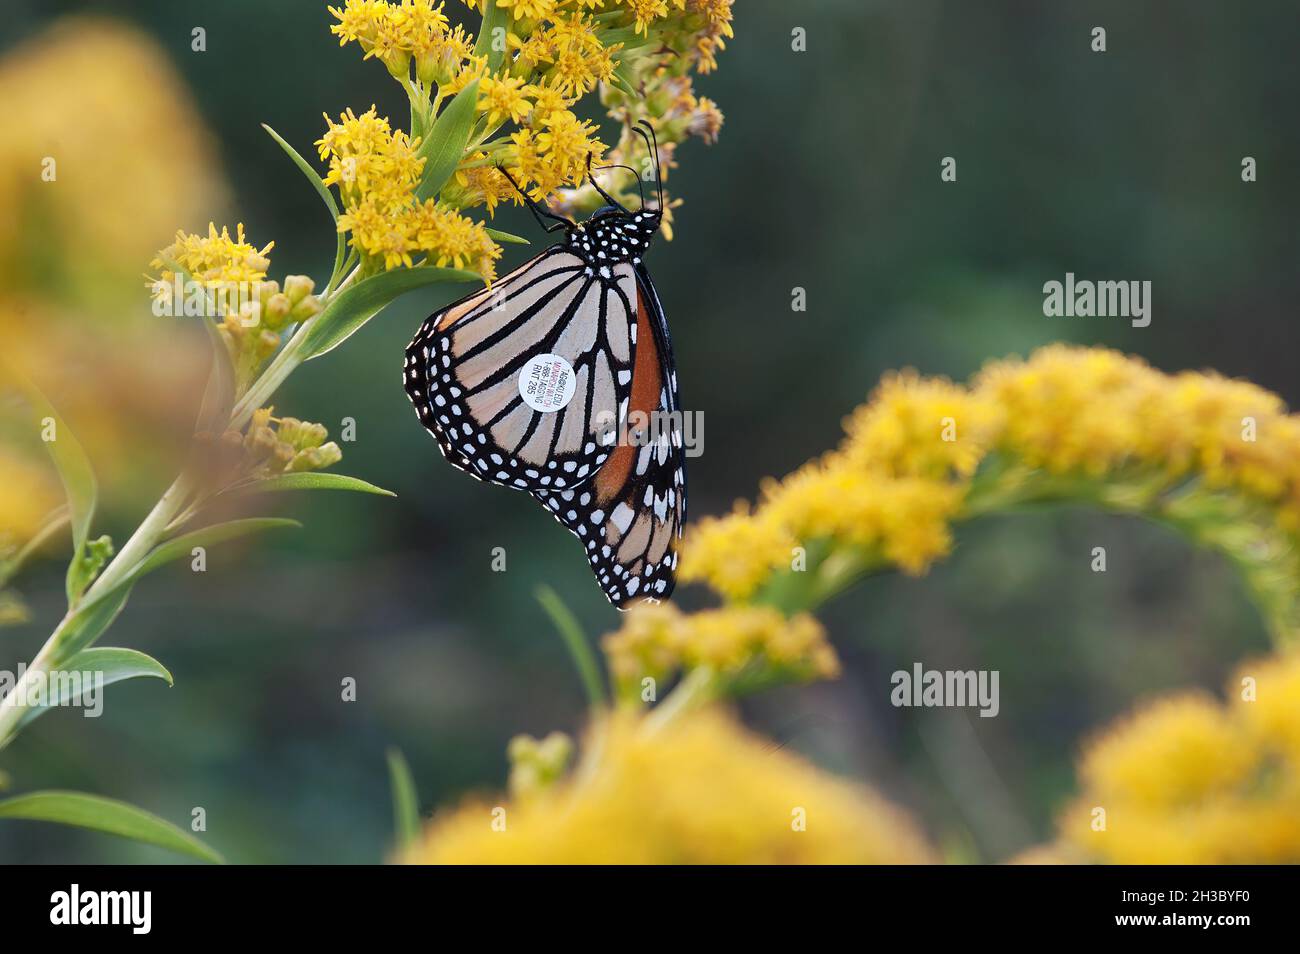 Monarch butterfly with tag nectaring on seaside goldenrod during fall migration Stock Photo